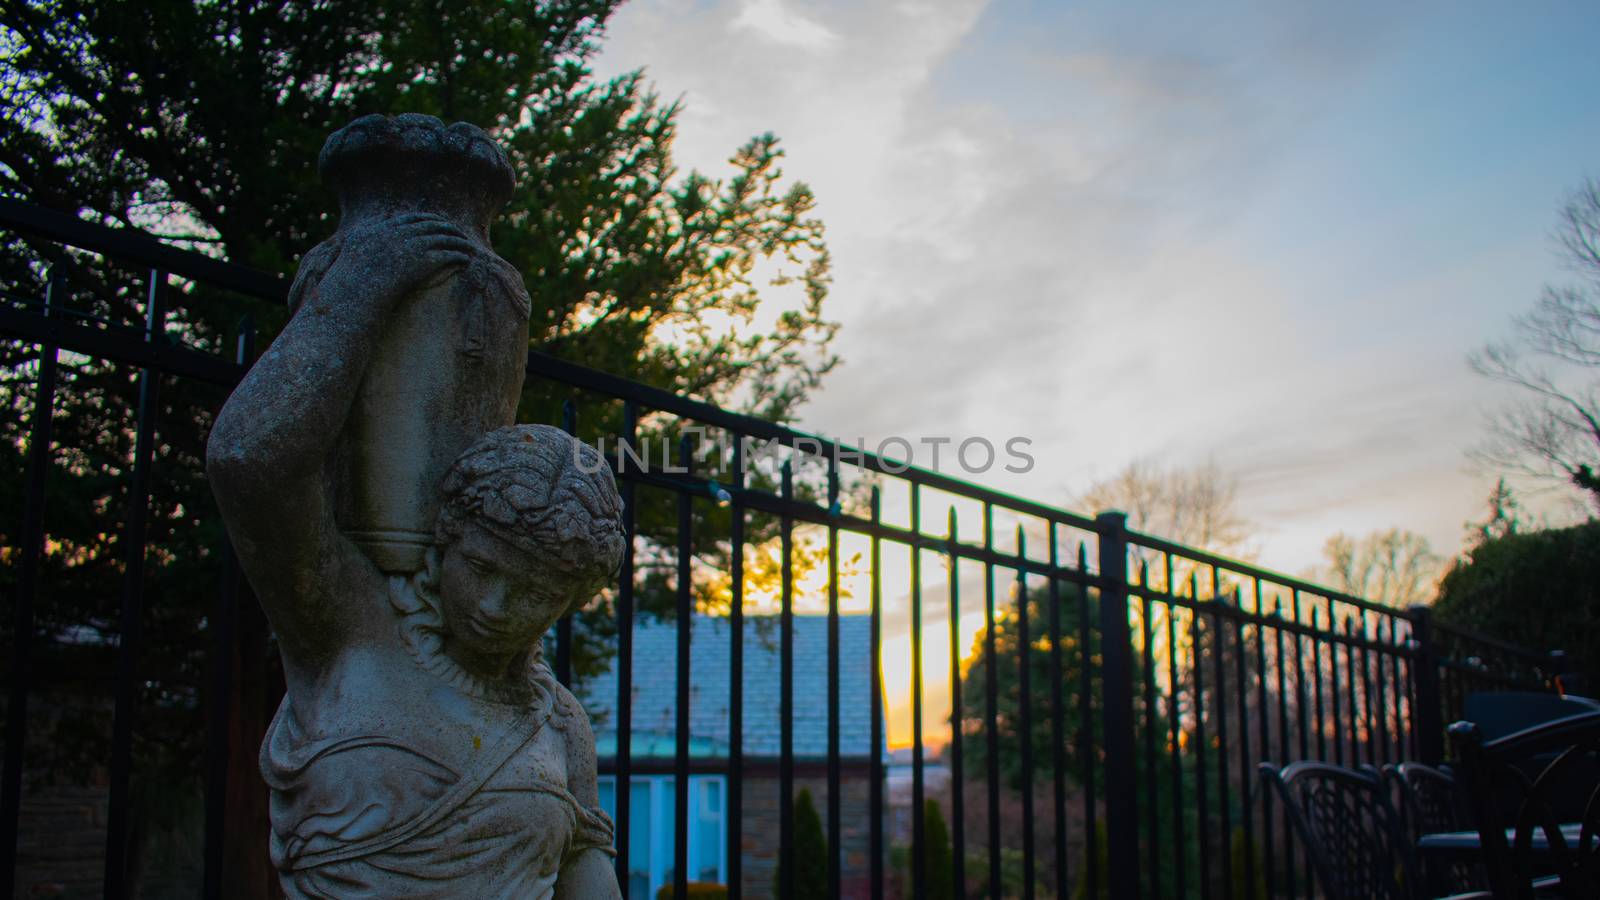 A Statue of a Woman Holding a Vase With a Fence and Sunset in the background